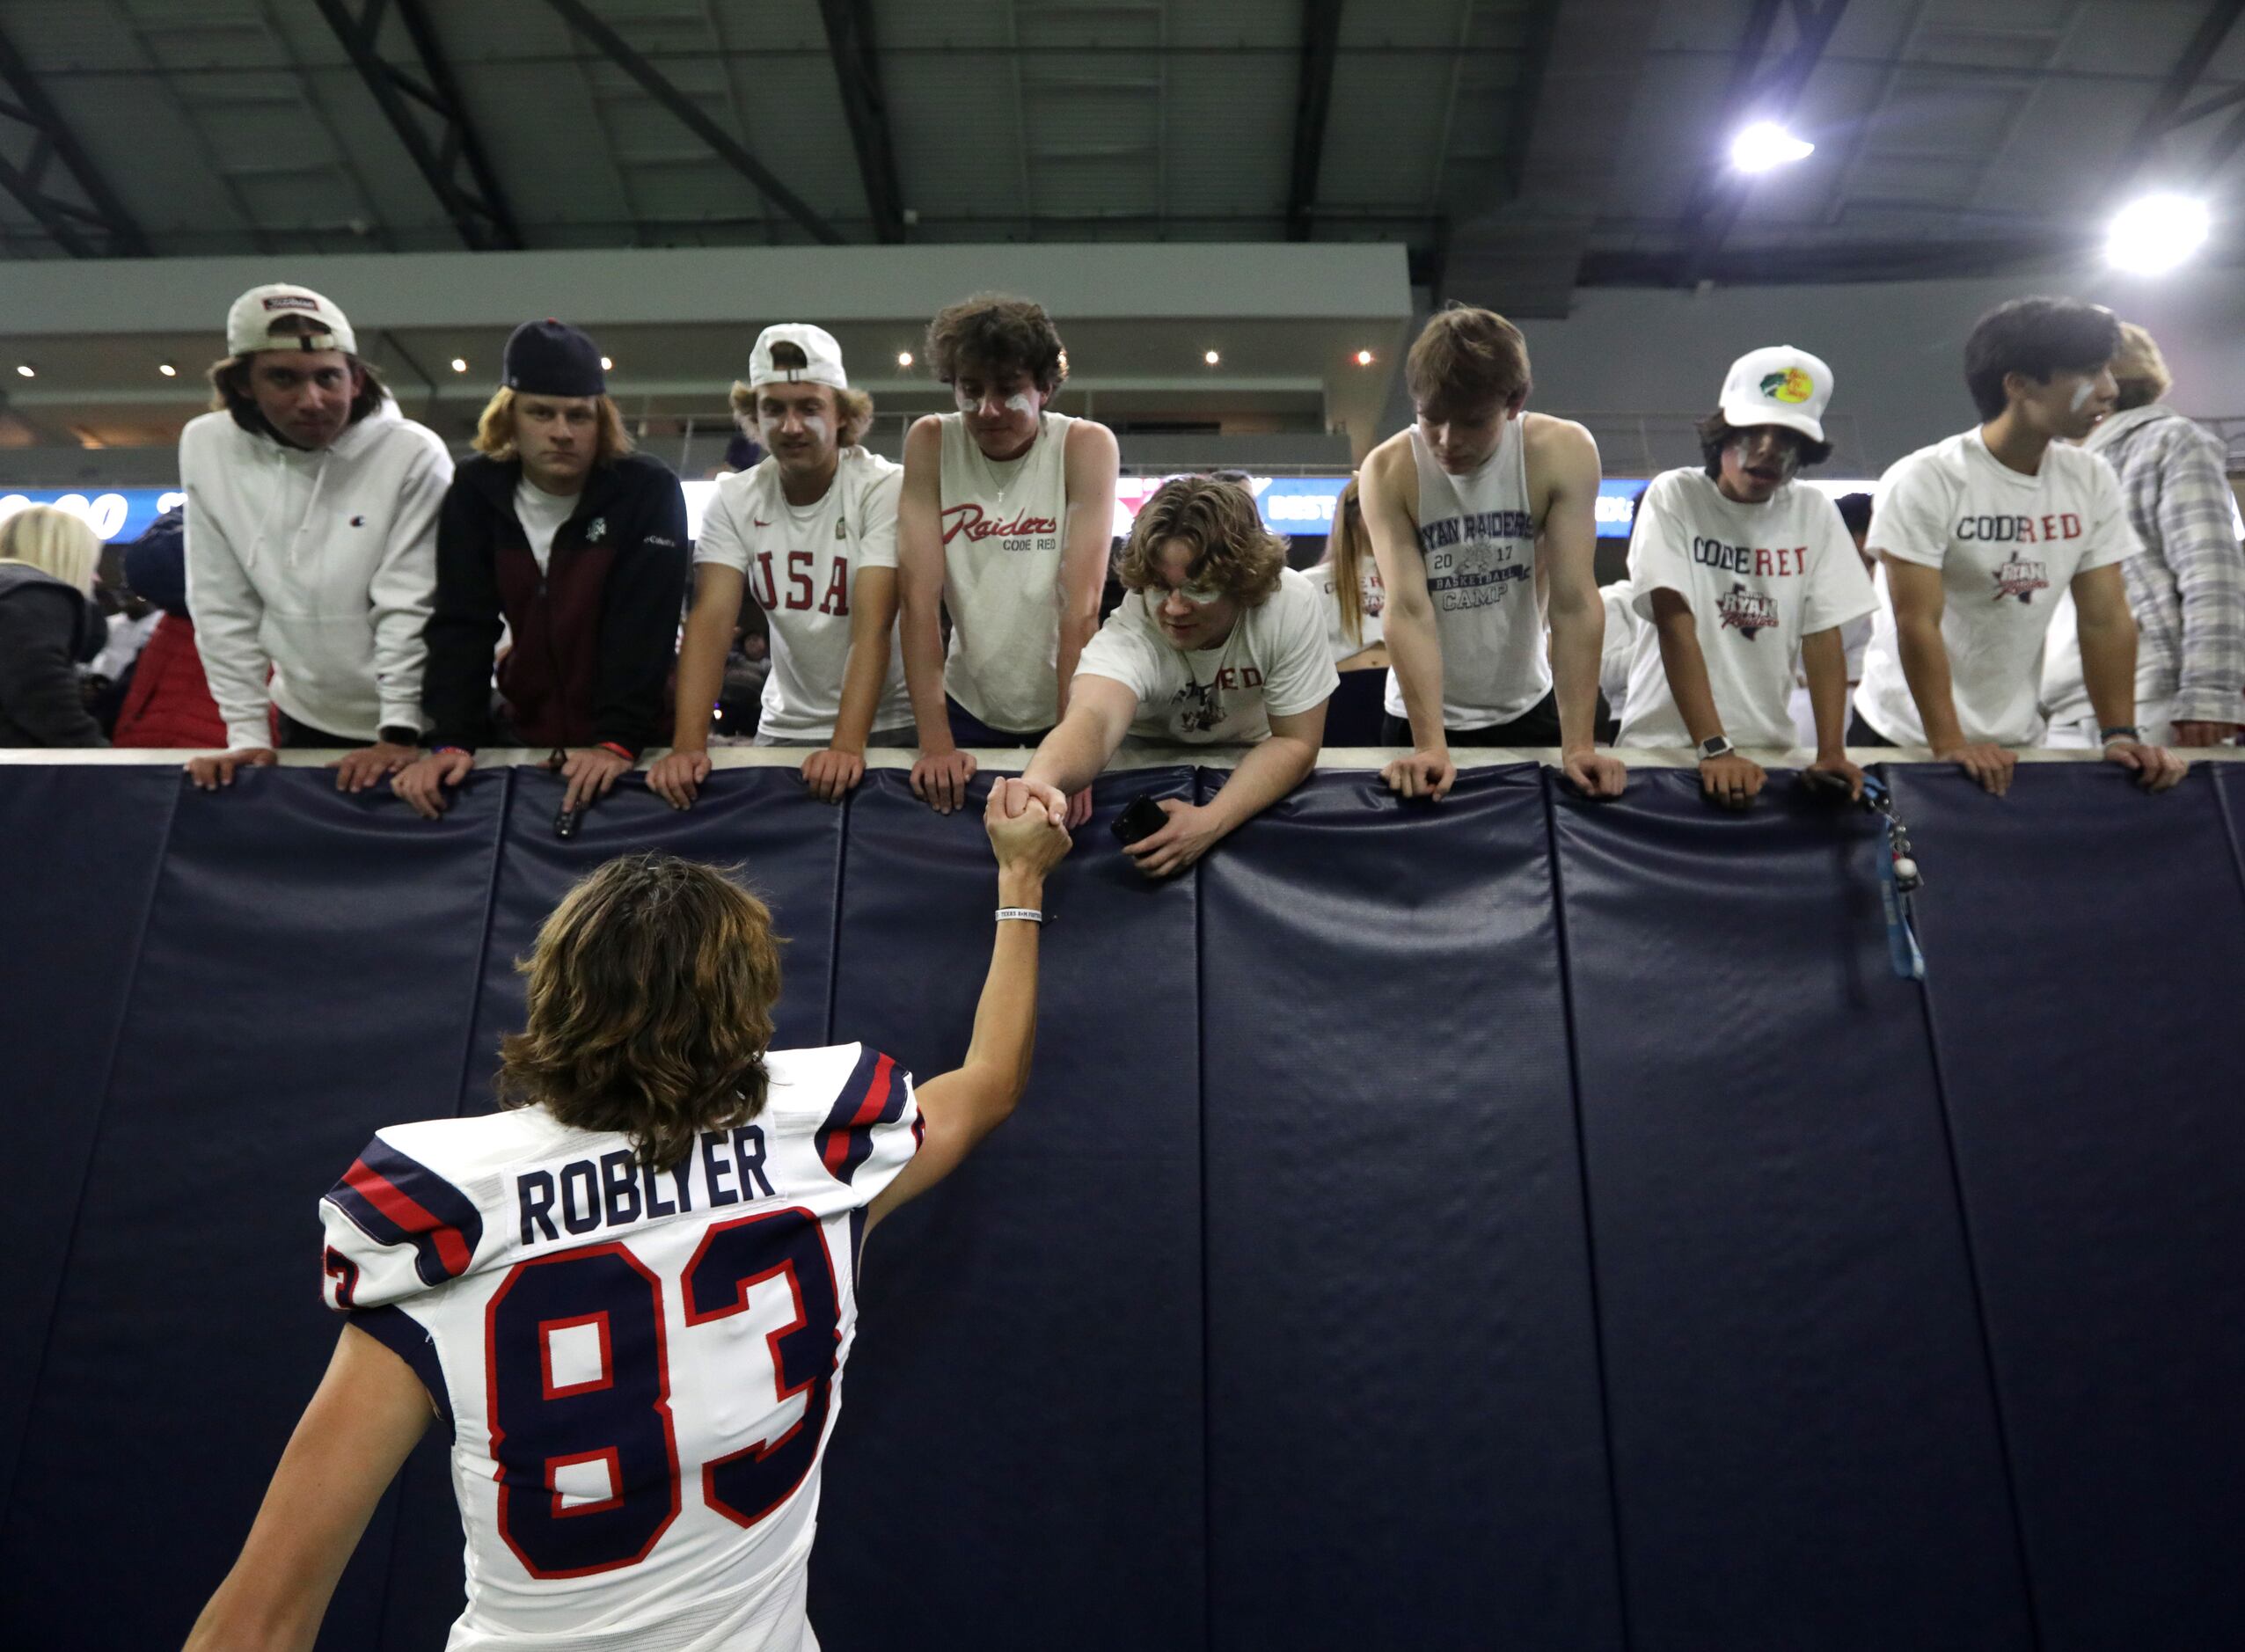 #83 Clayton Roblyer greets some friends after winning the Denton Ryan vs. Frisco Lone Star...